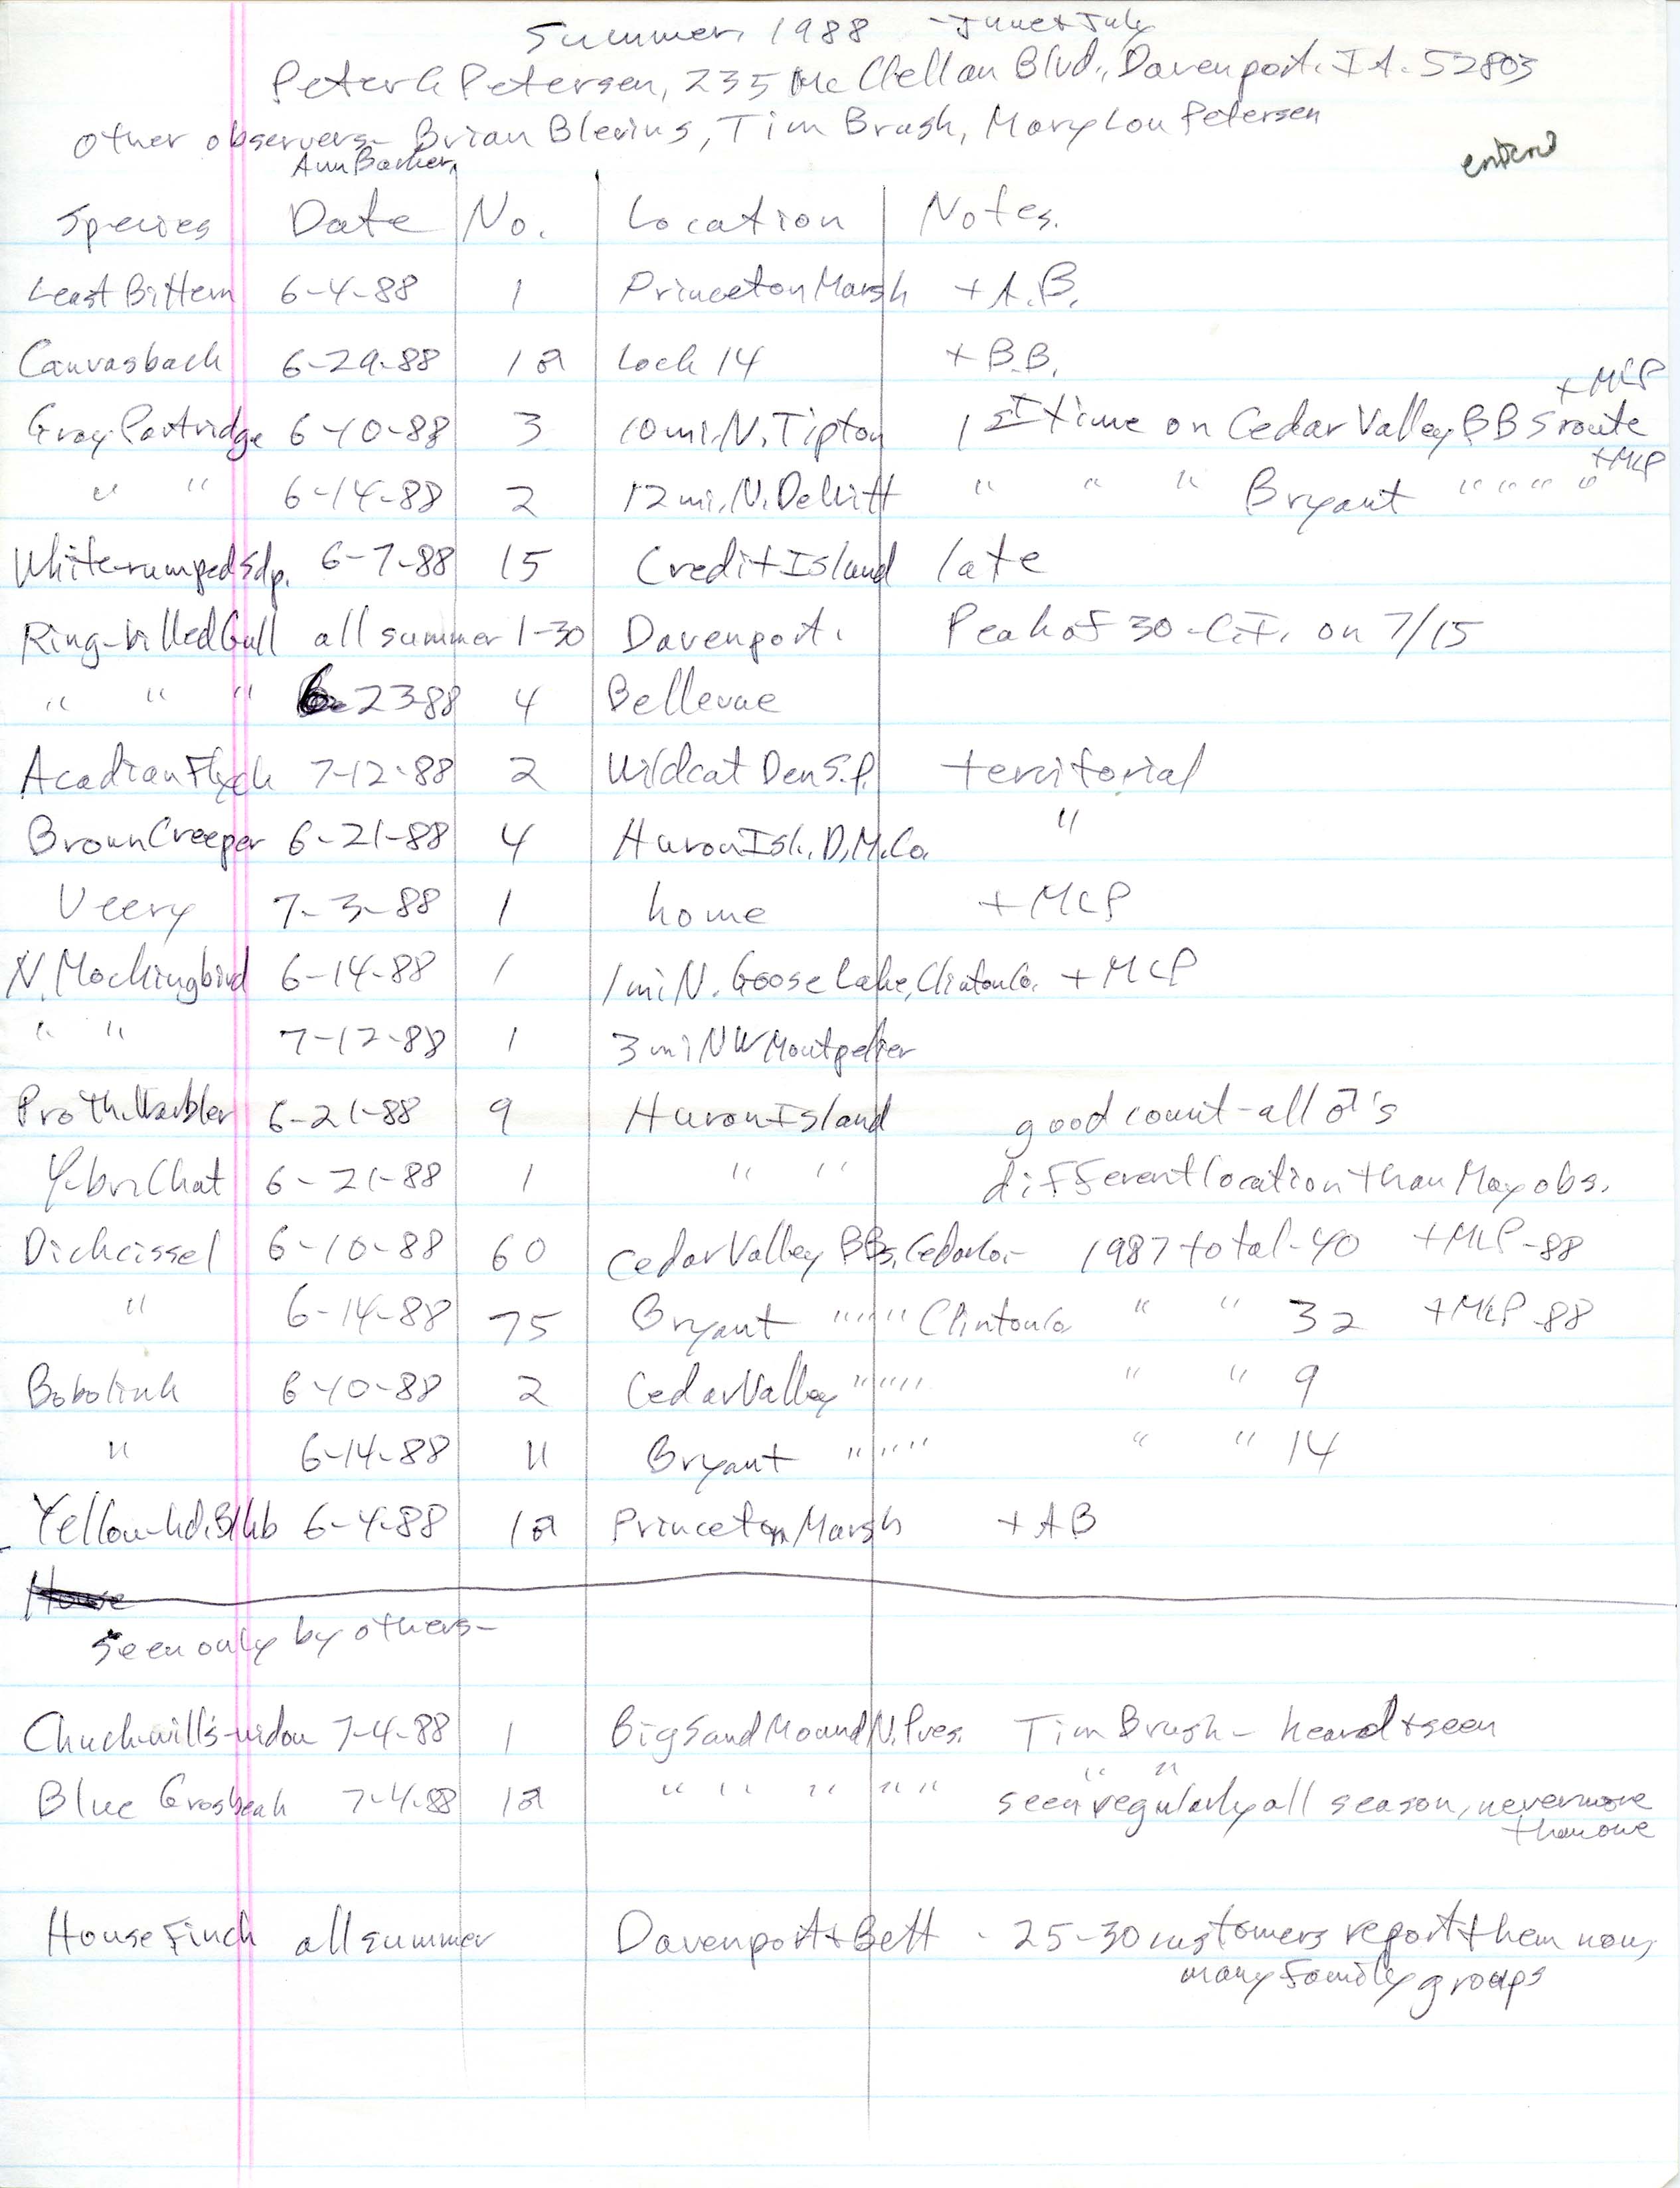 Field notes contributed by Peter C. Petersen, summer 1988